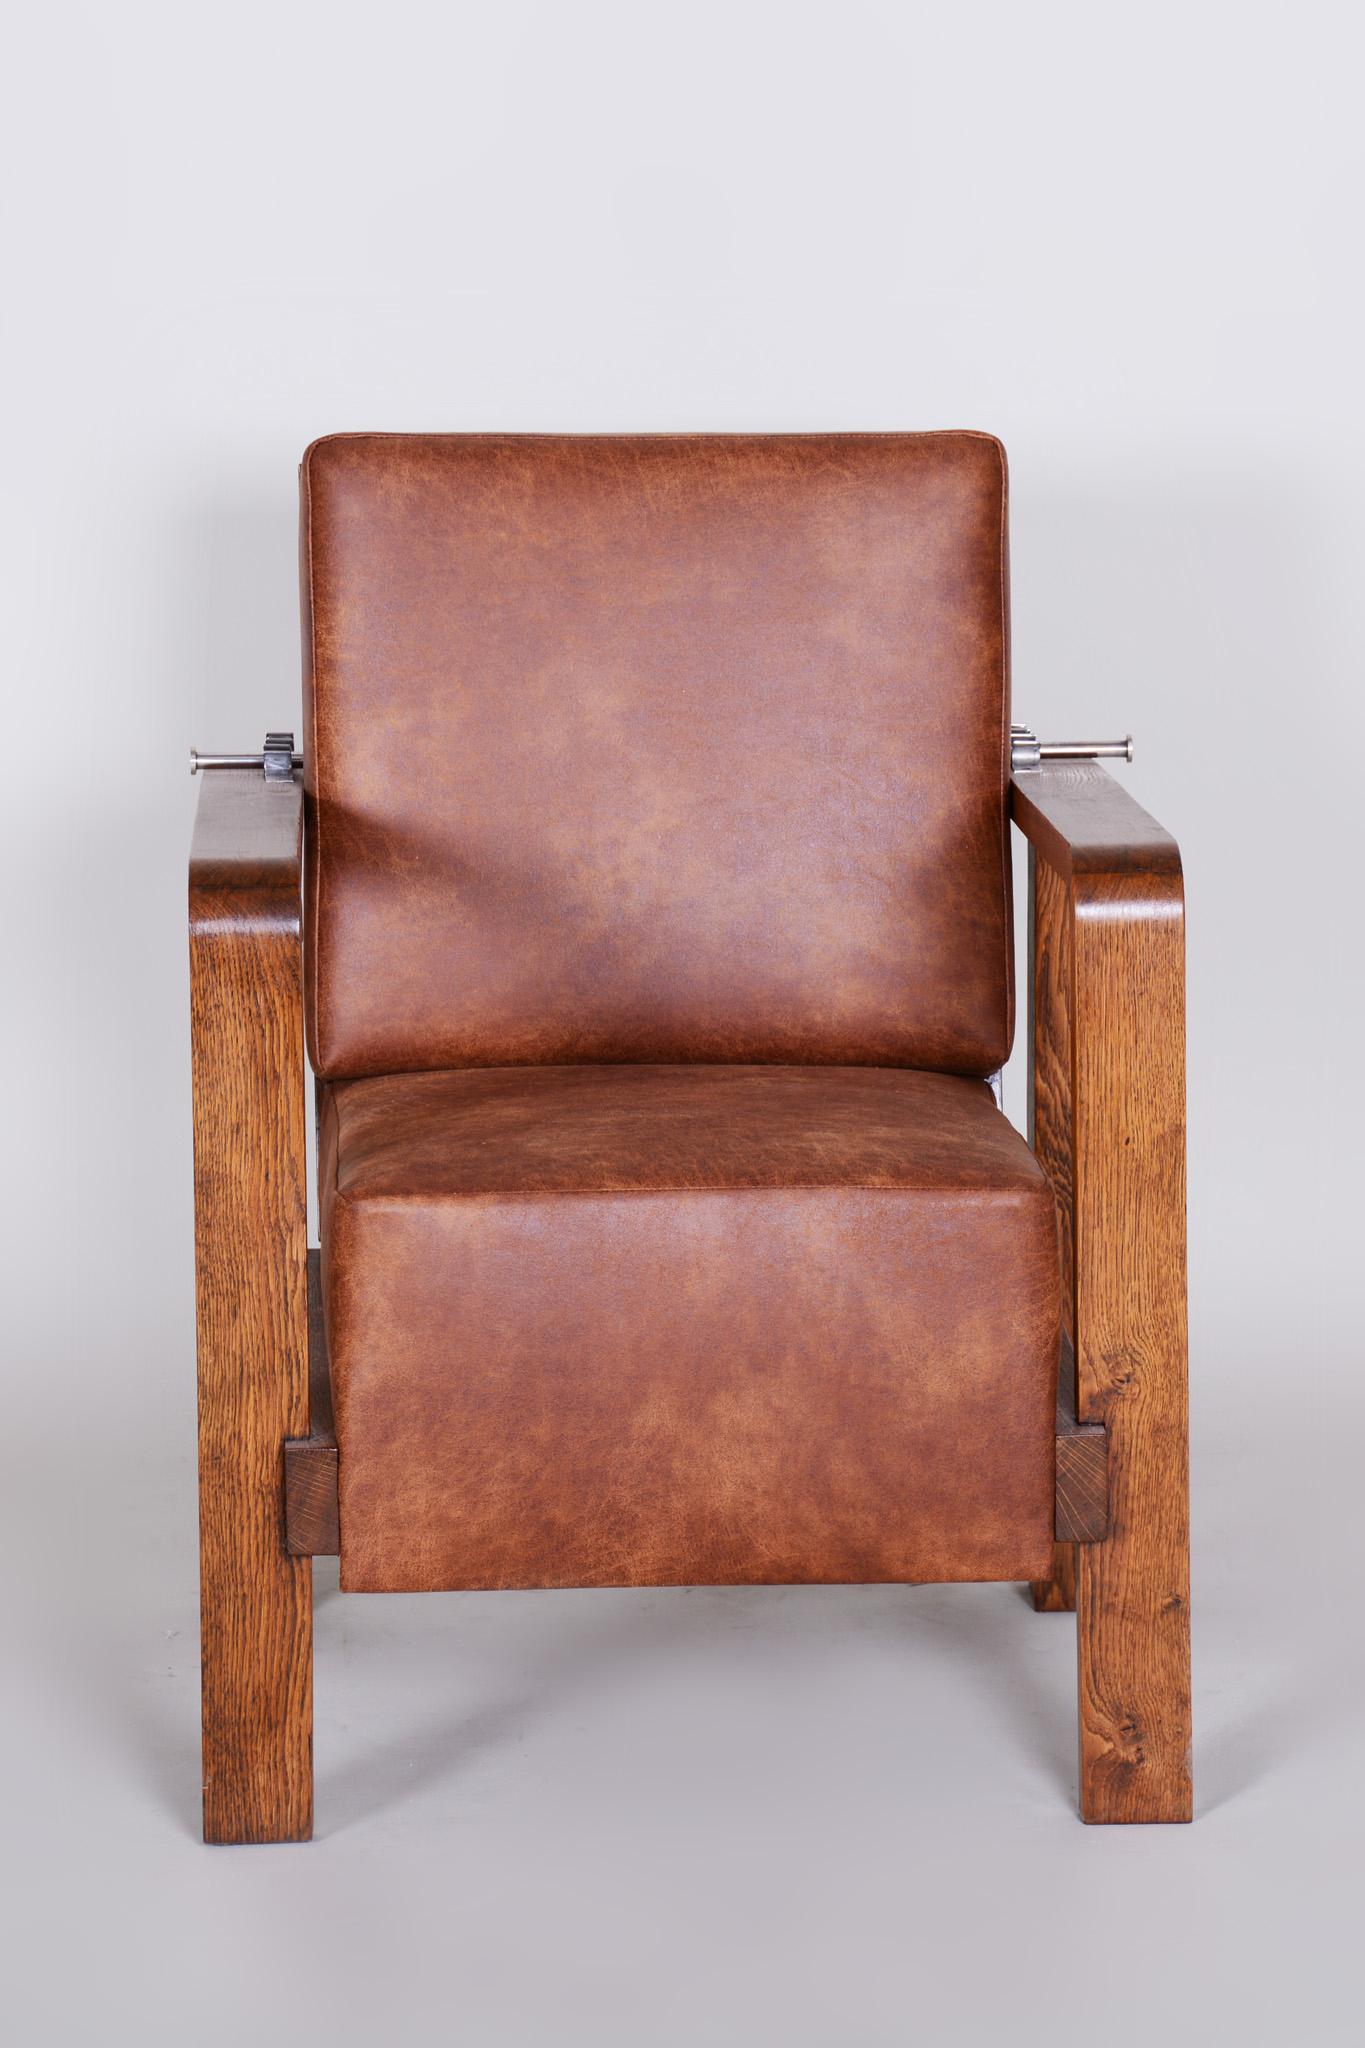 Pair of Czech Adjustable Functionalist Leather and Oak Armchairs, 1930s For Sale 6